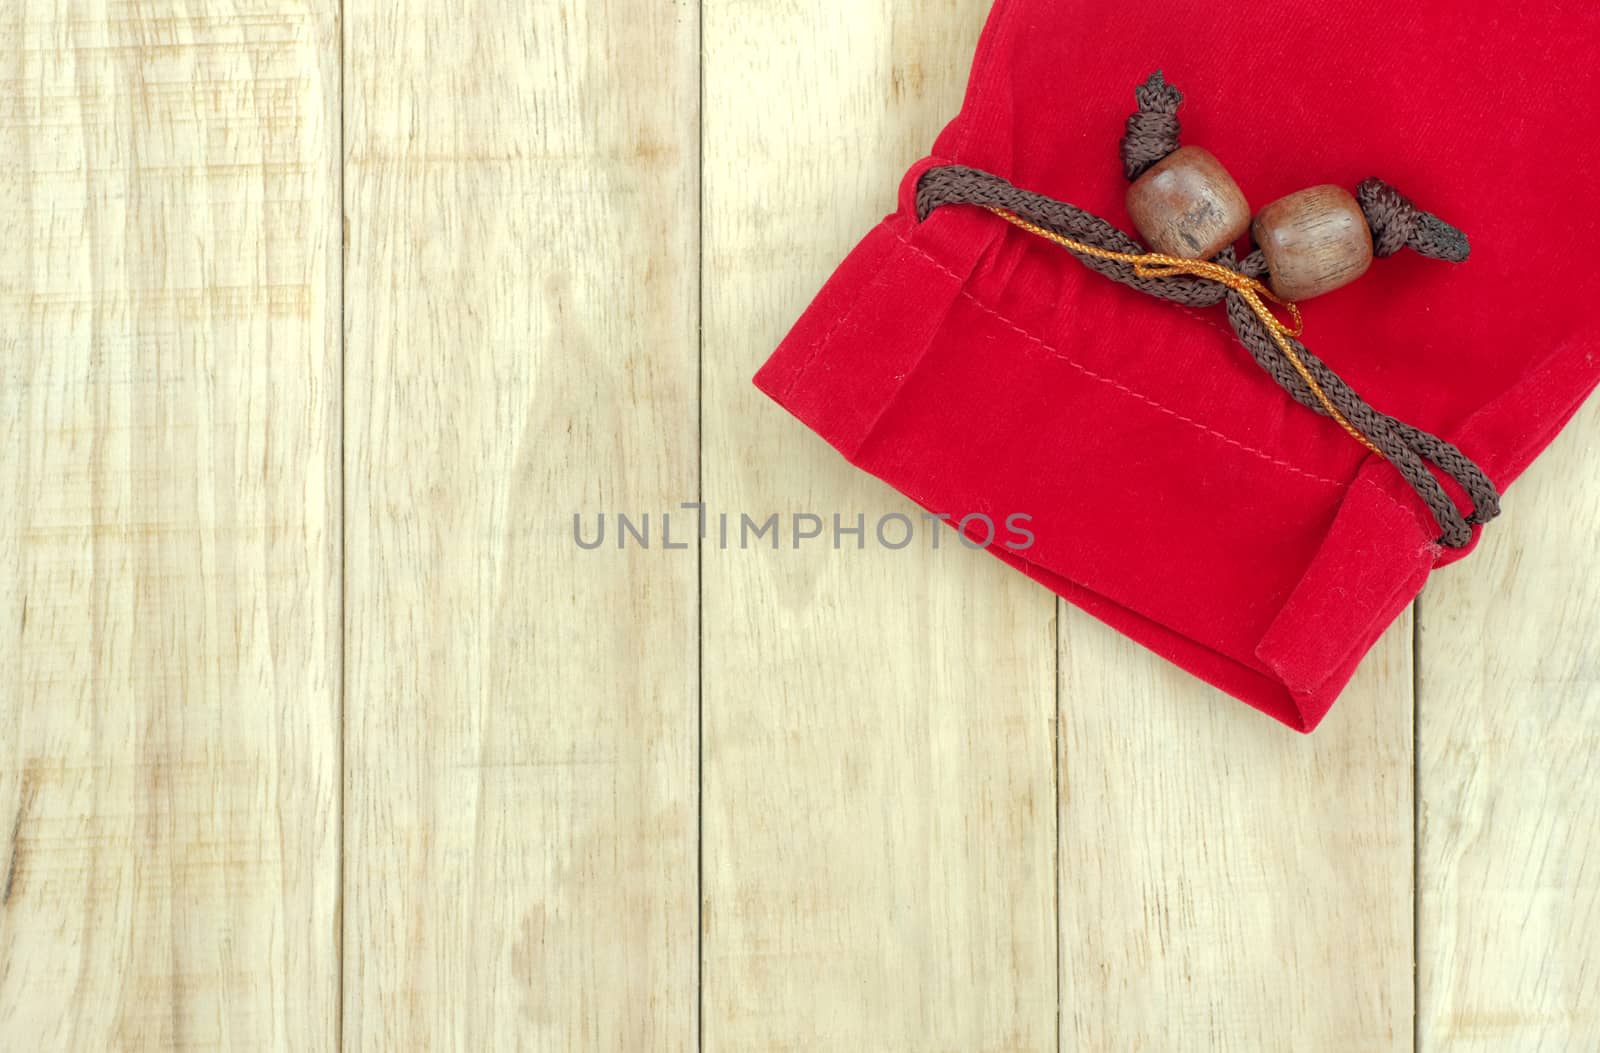 Small red bag on wood pattern background